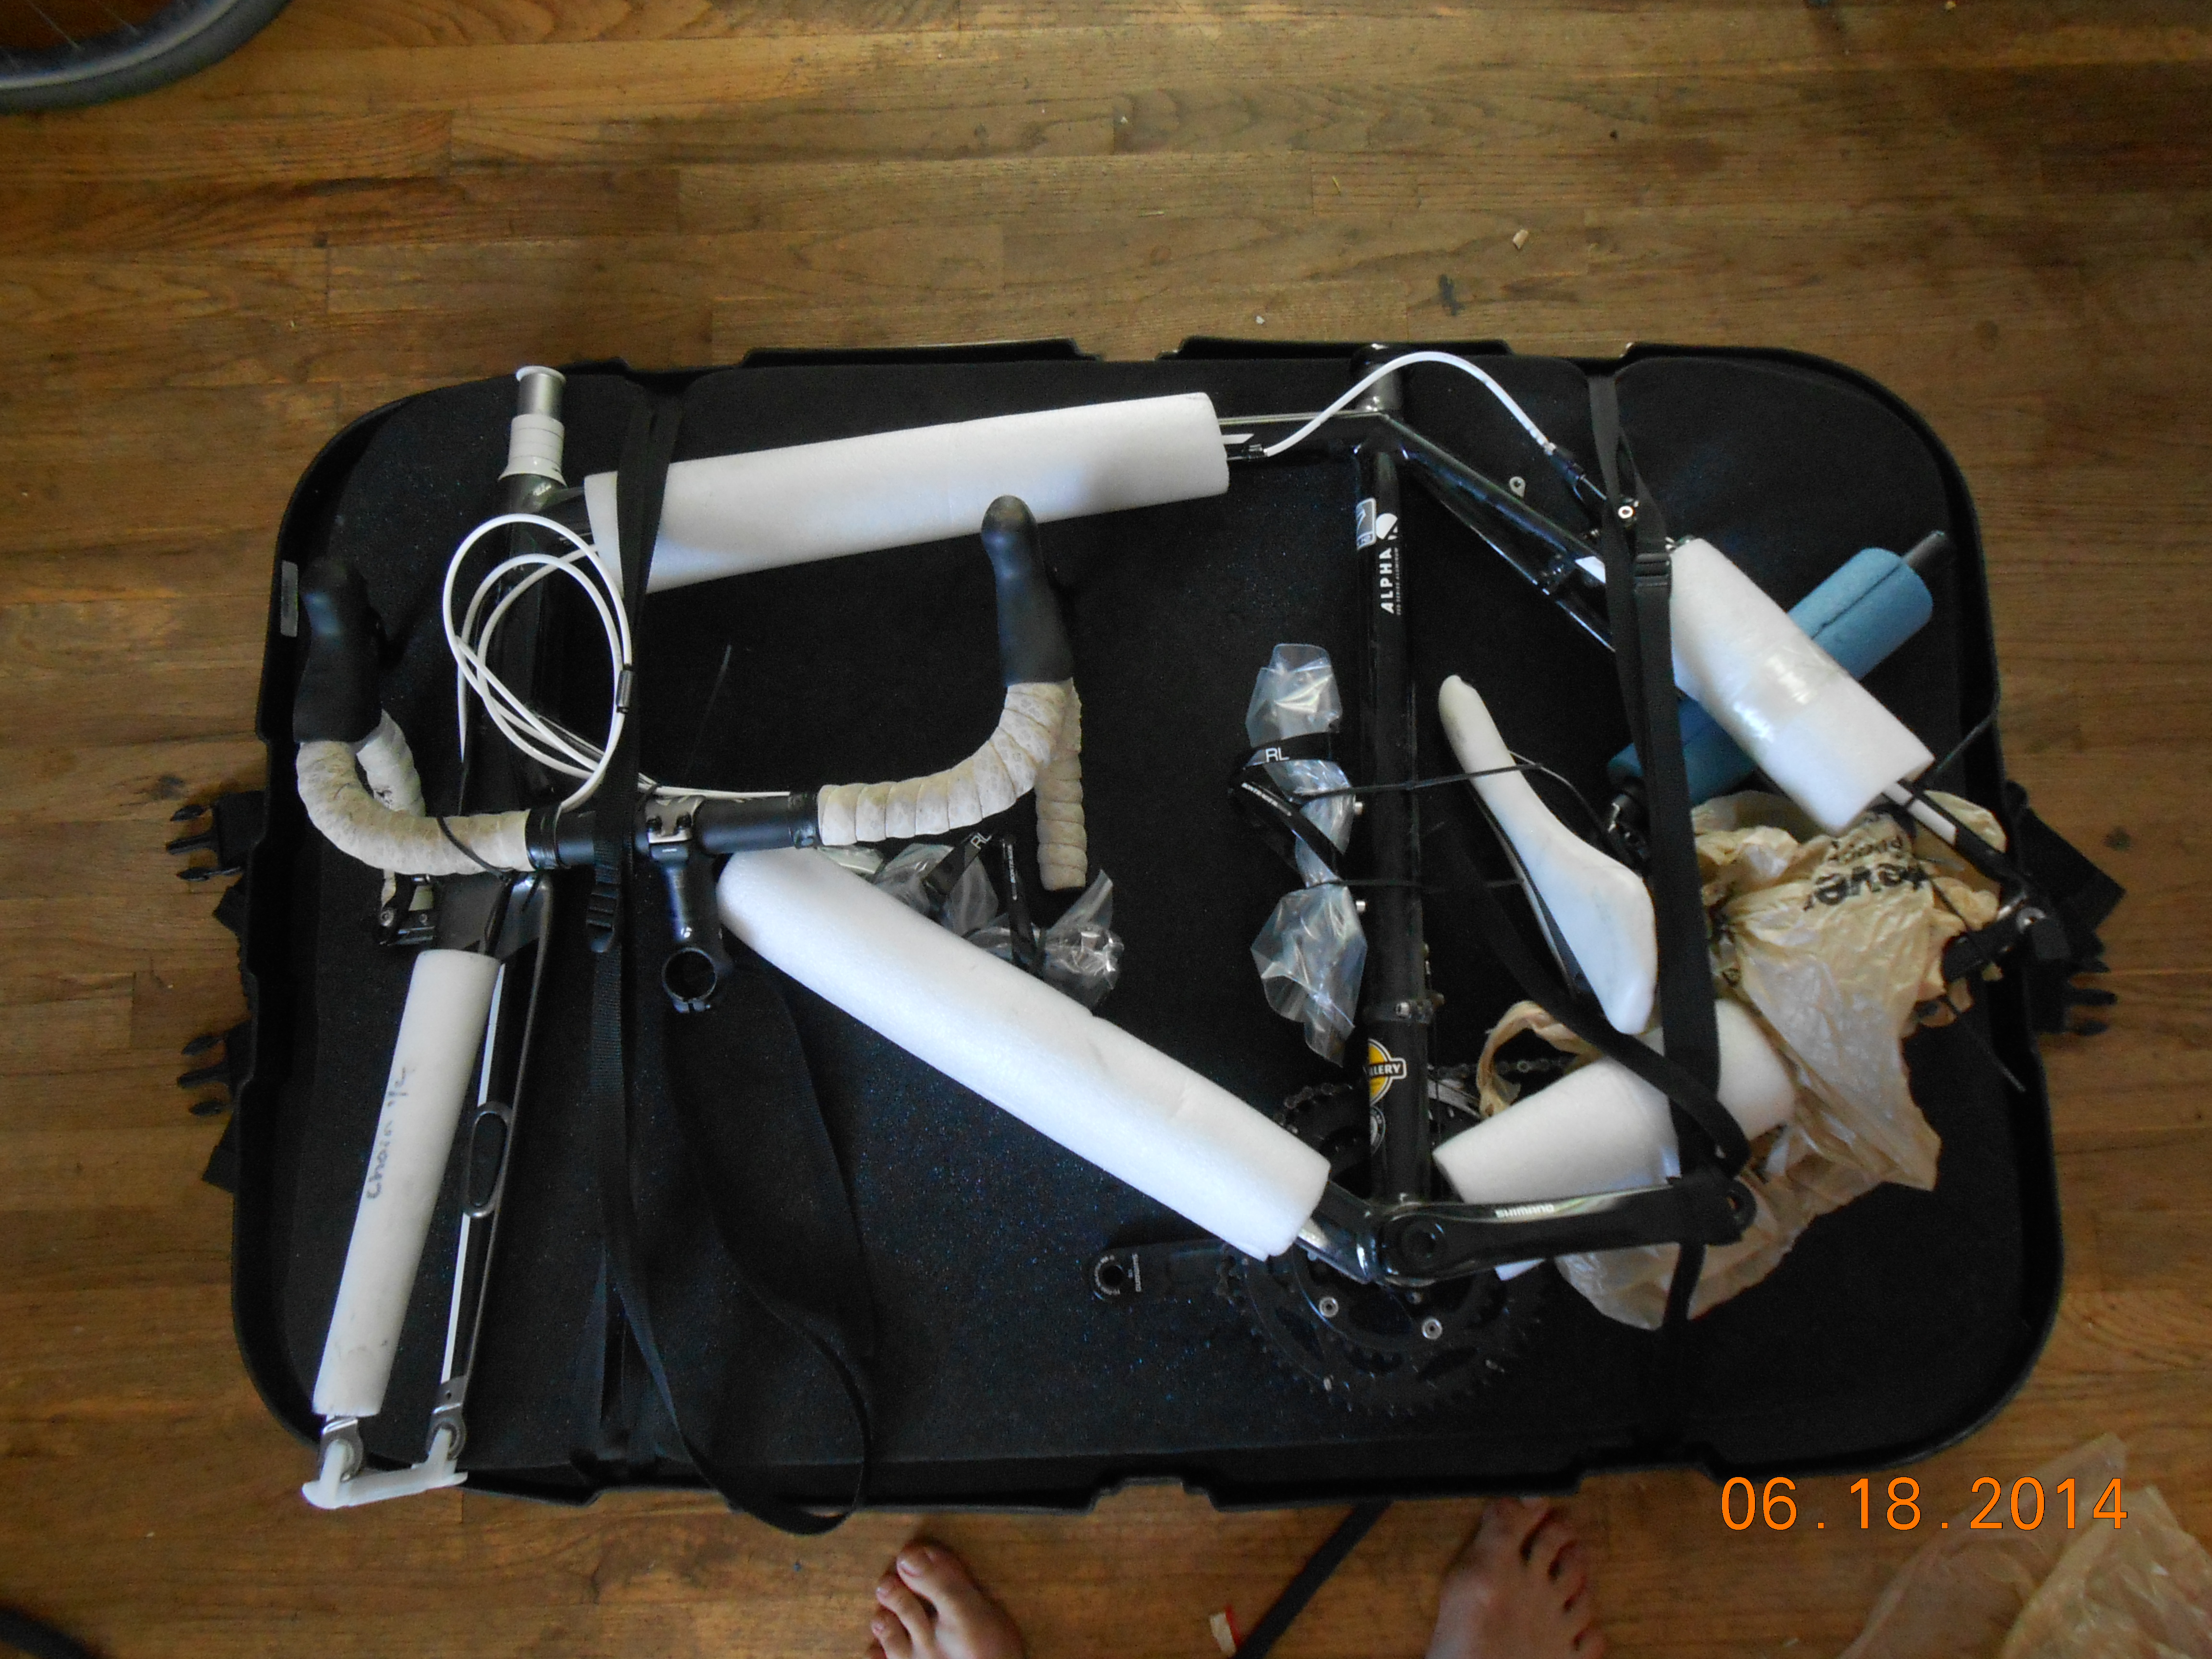 Disassembled bicycle ready for boxing.